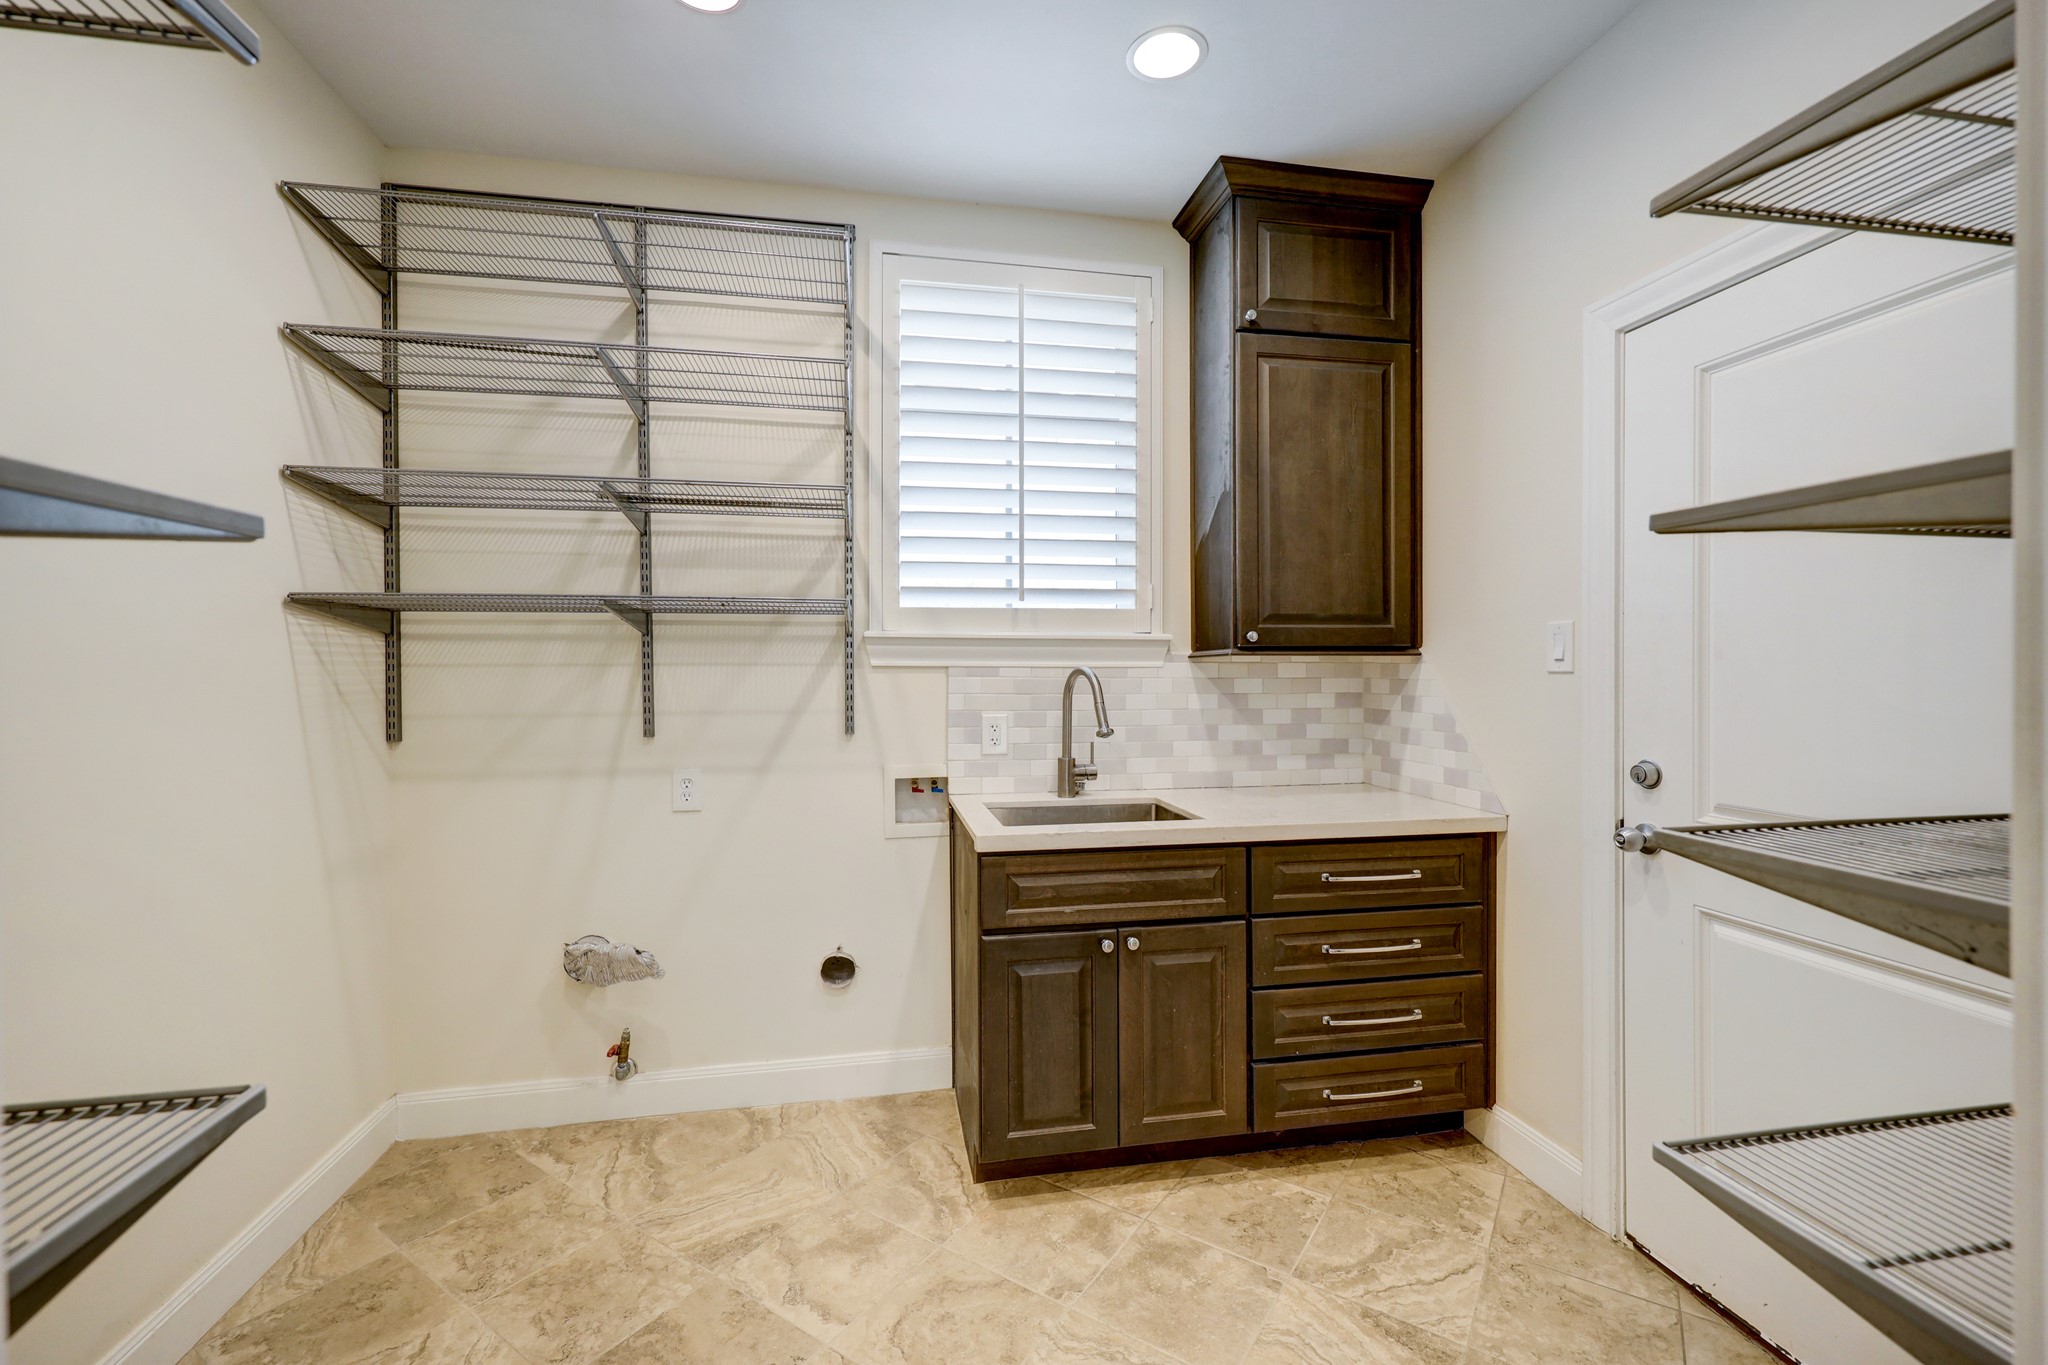 Utility room just off of the kitchen features custom Elfa shelving for plenty of storage, utility sink area, and 2